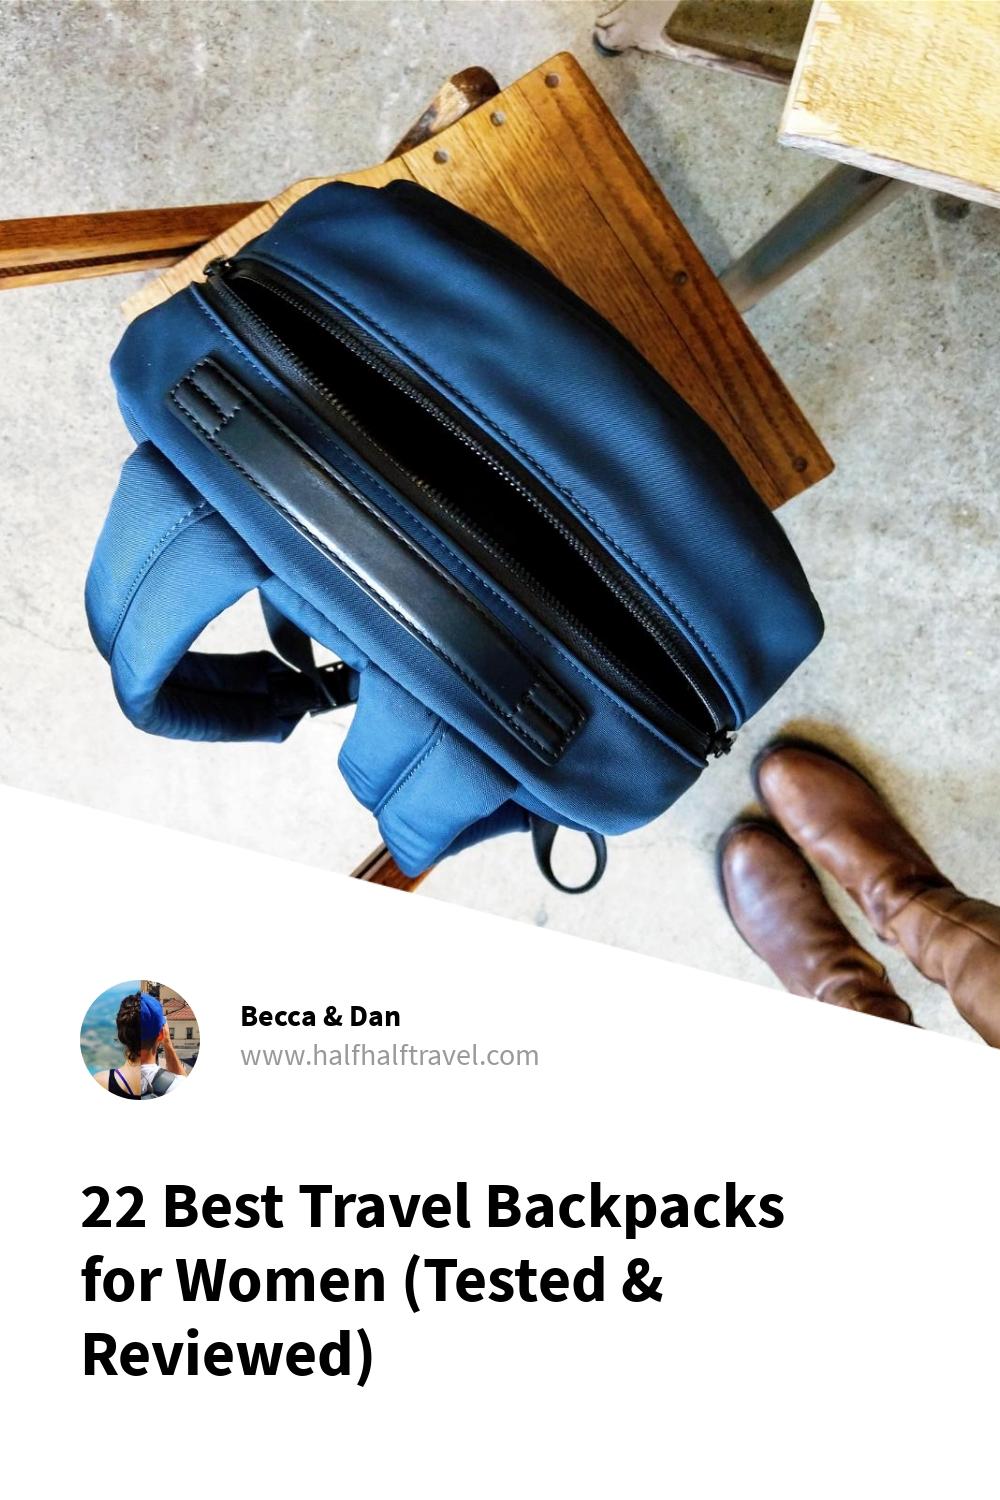 Pinterest image from the '22 Best Travel Backpacks for Women (Tested & Reviewed)' article on Half Half Travel